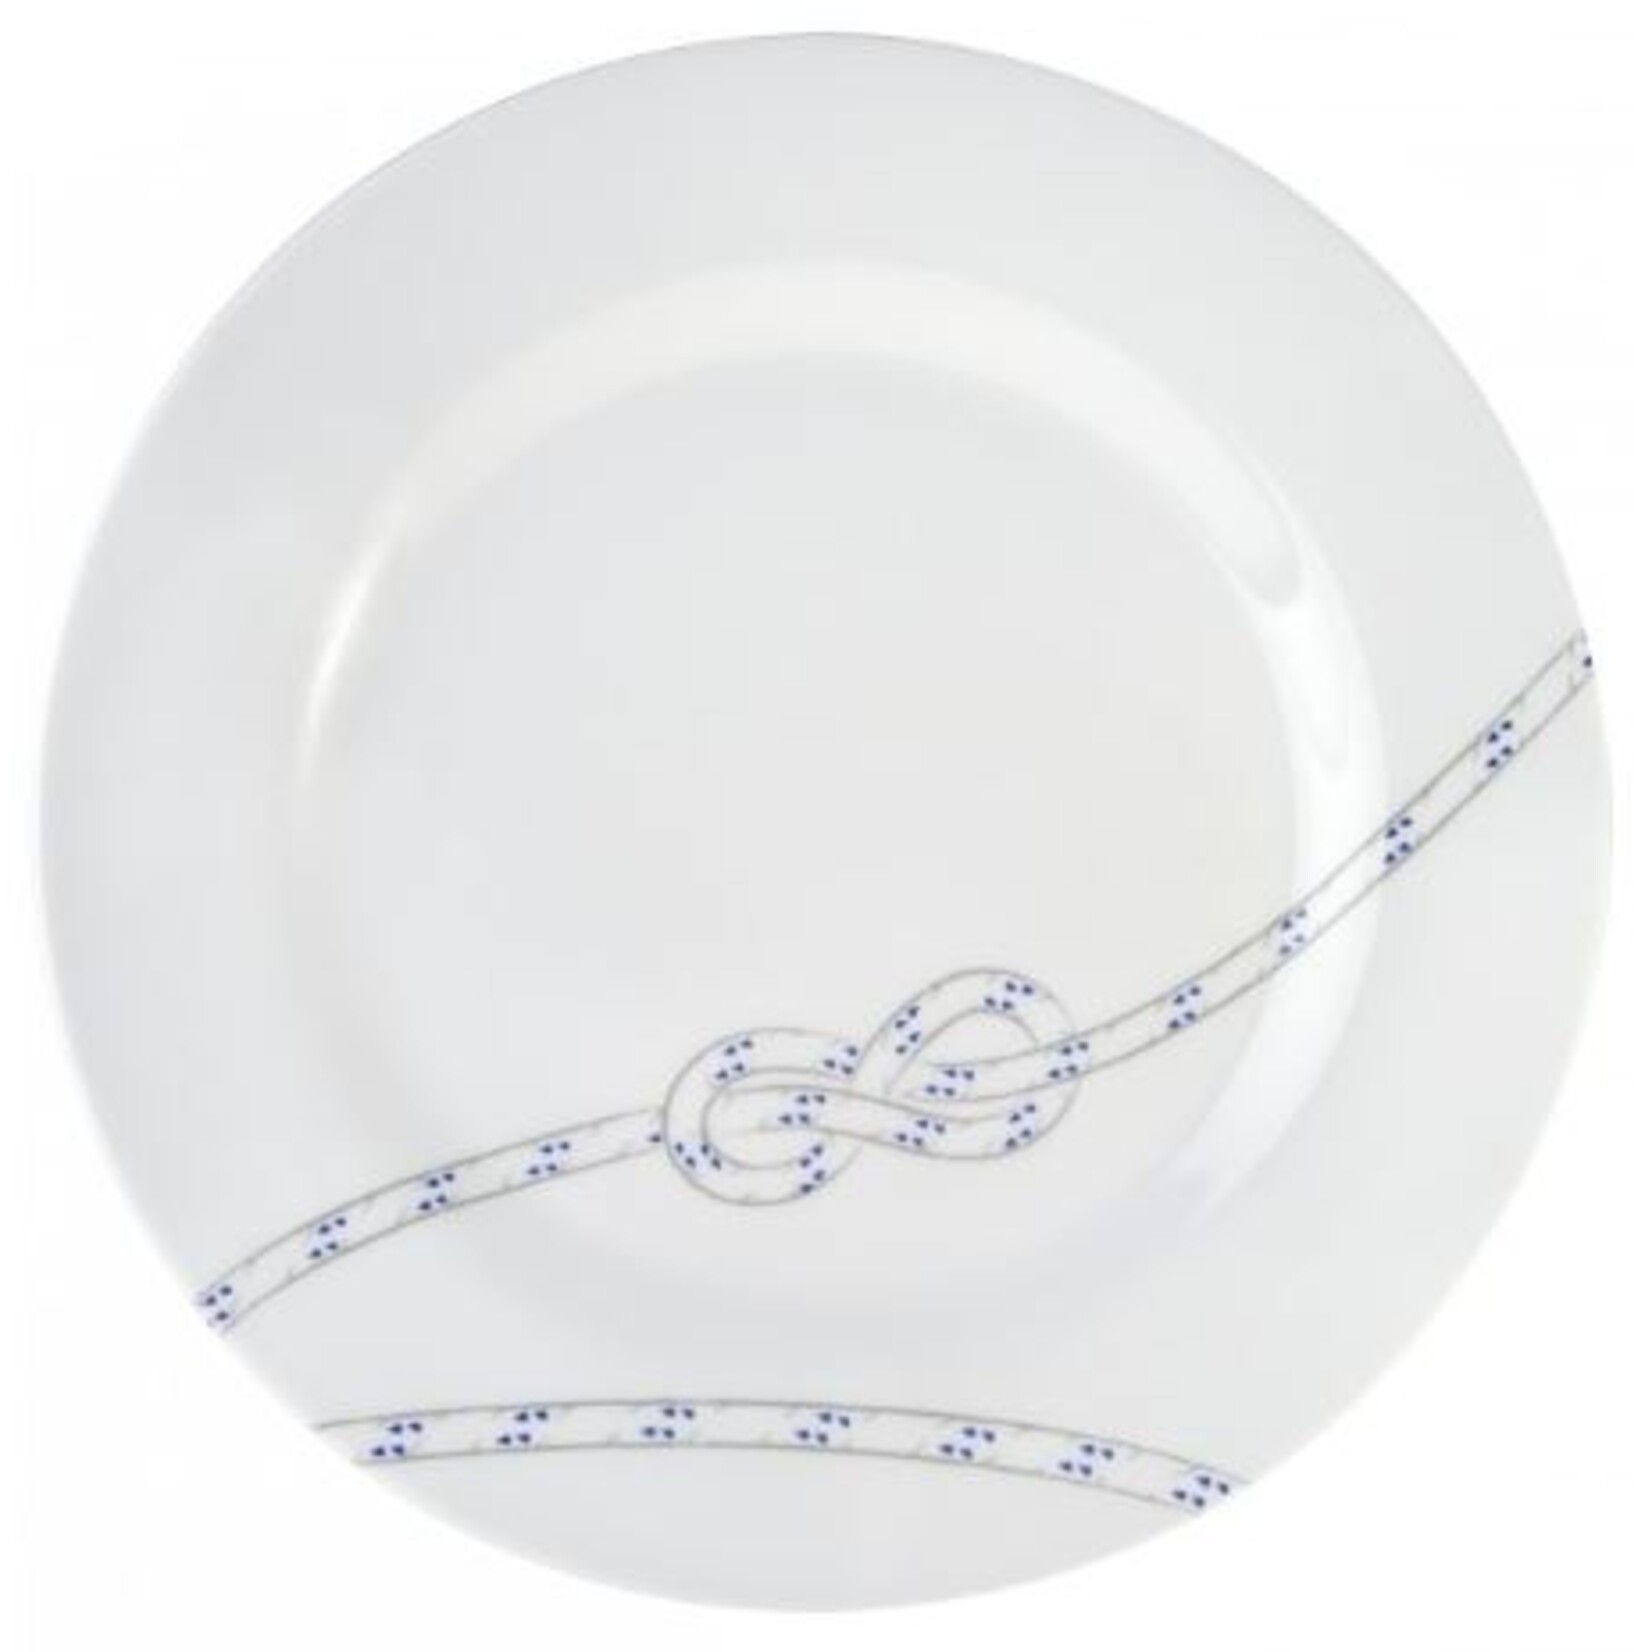 Plastimo South pacific dinnerplate round